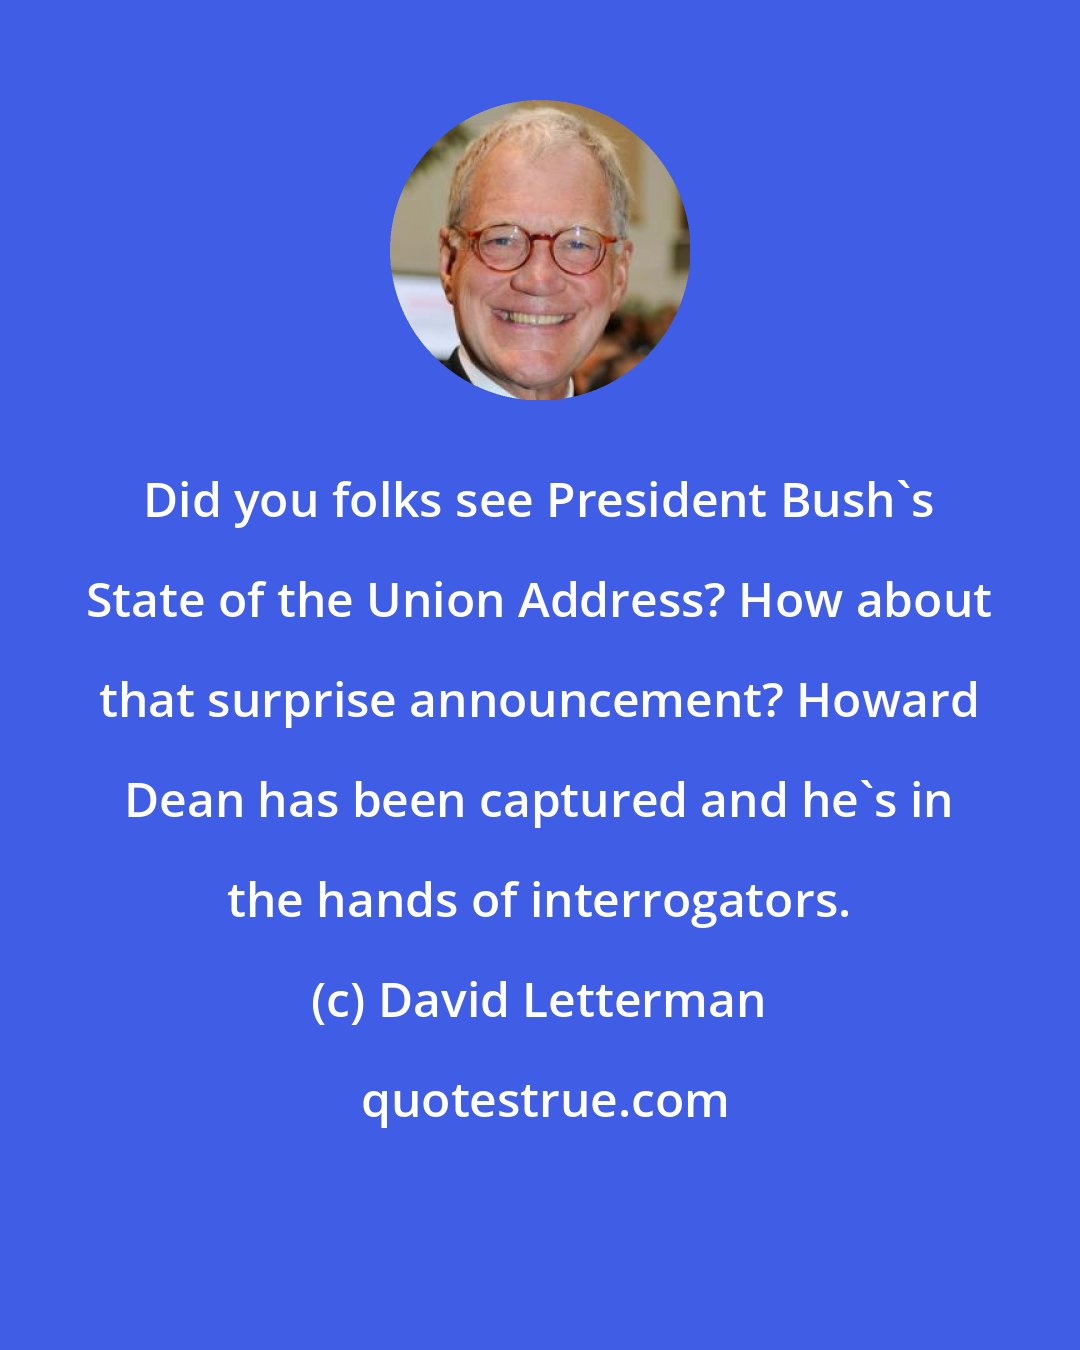 David Letterman: Did you folks see President Bush's State of the Union Address? How about that surprise announcement? Howard Dean has been captured and he's in the hands of interrogators.